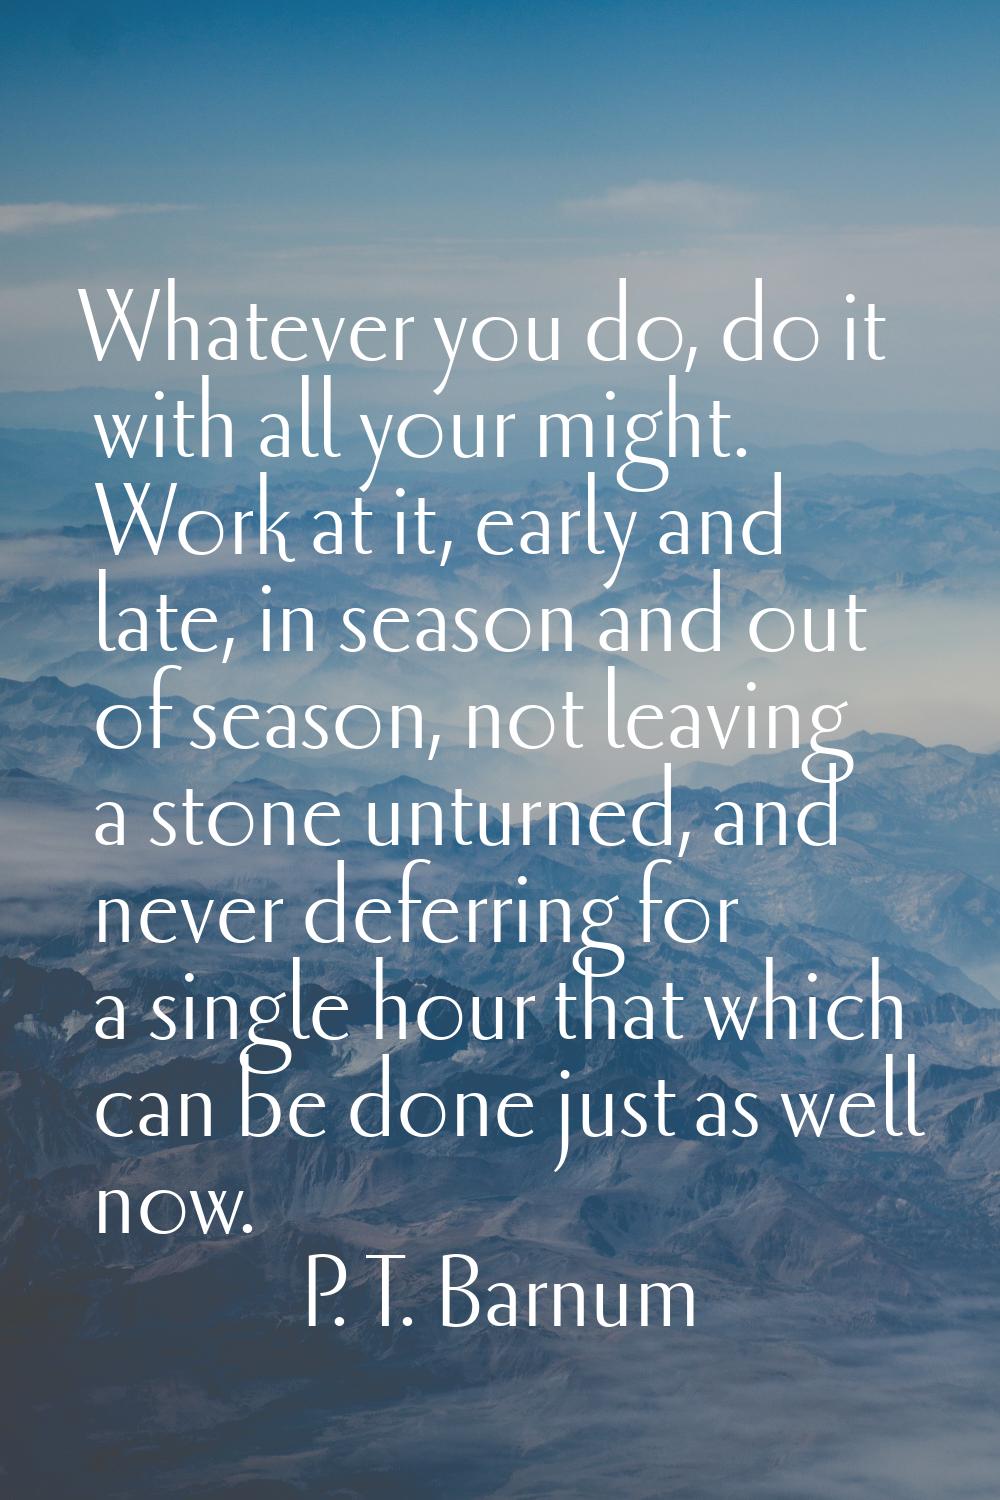 Whatever you do, do it with all your might. Work at it, early and late, in season and out of season